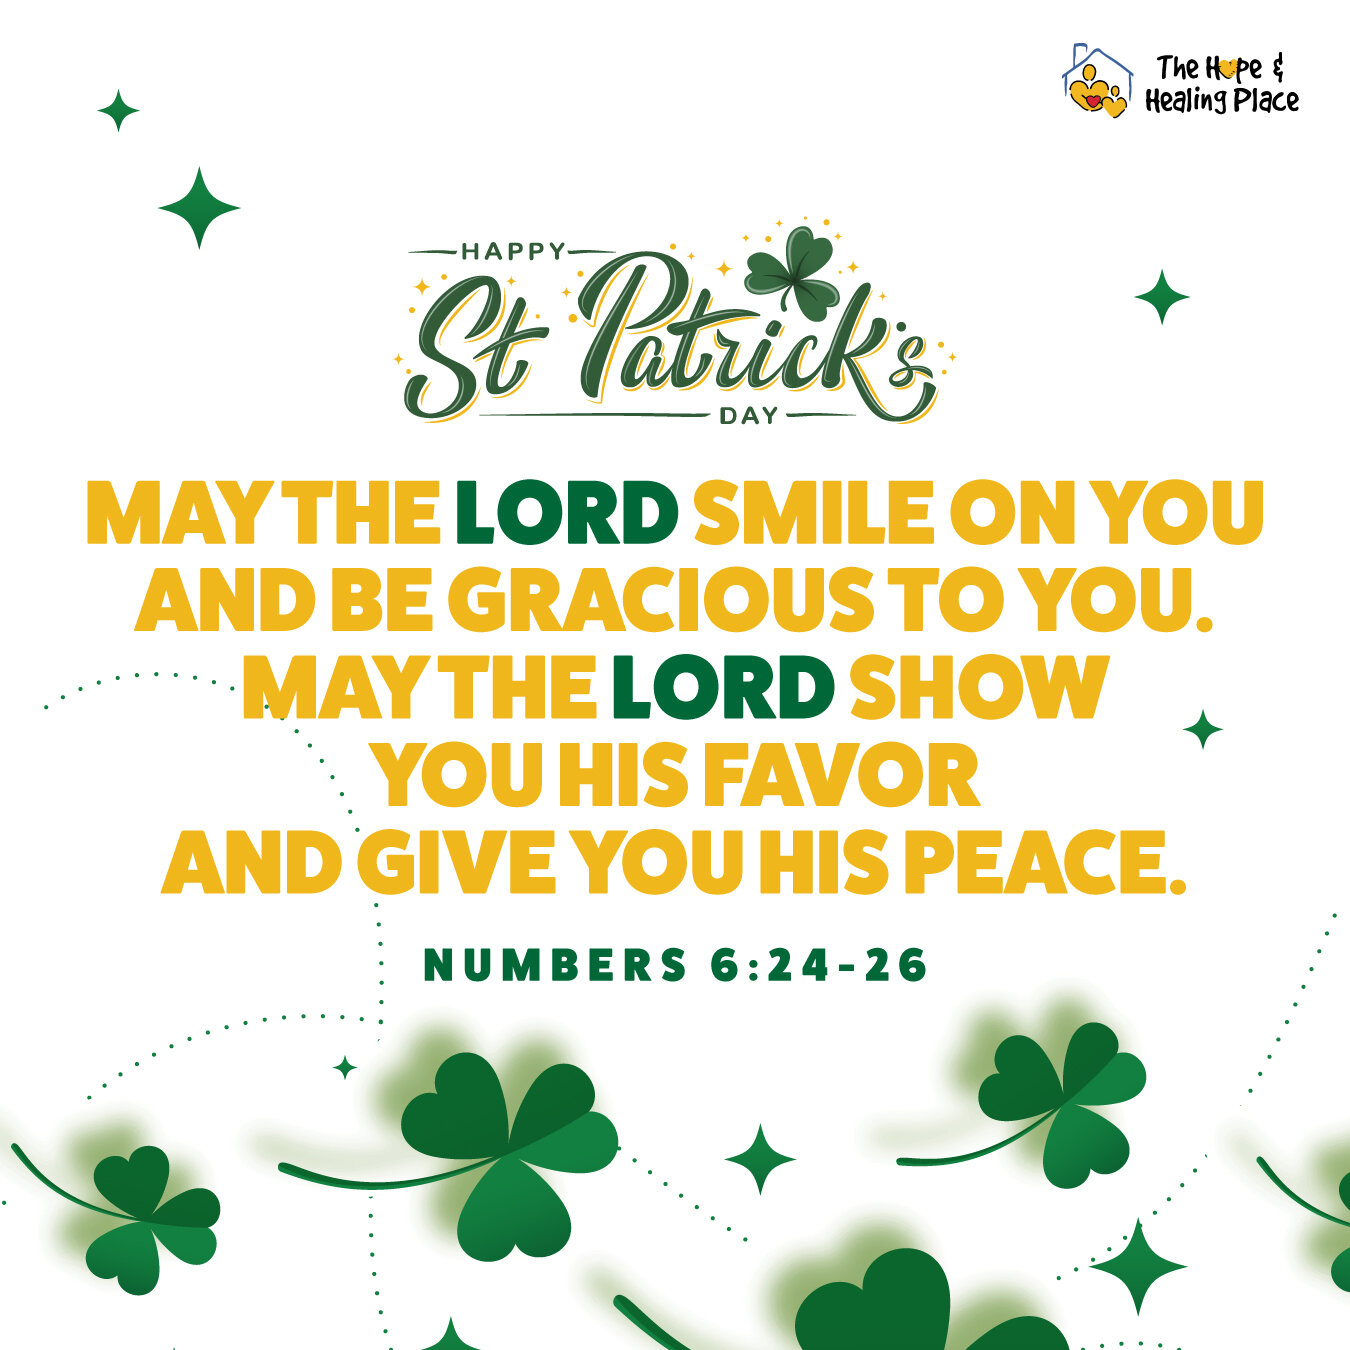 &quot;My name is Patrick. I am a sinner, a simple country person, and the least of all believers...&quot; 

St. Patrick, as humble and lowly as he was, was a man with a bold mission: to save the people God had given him a burden for. And that is not 